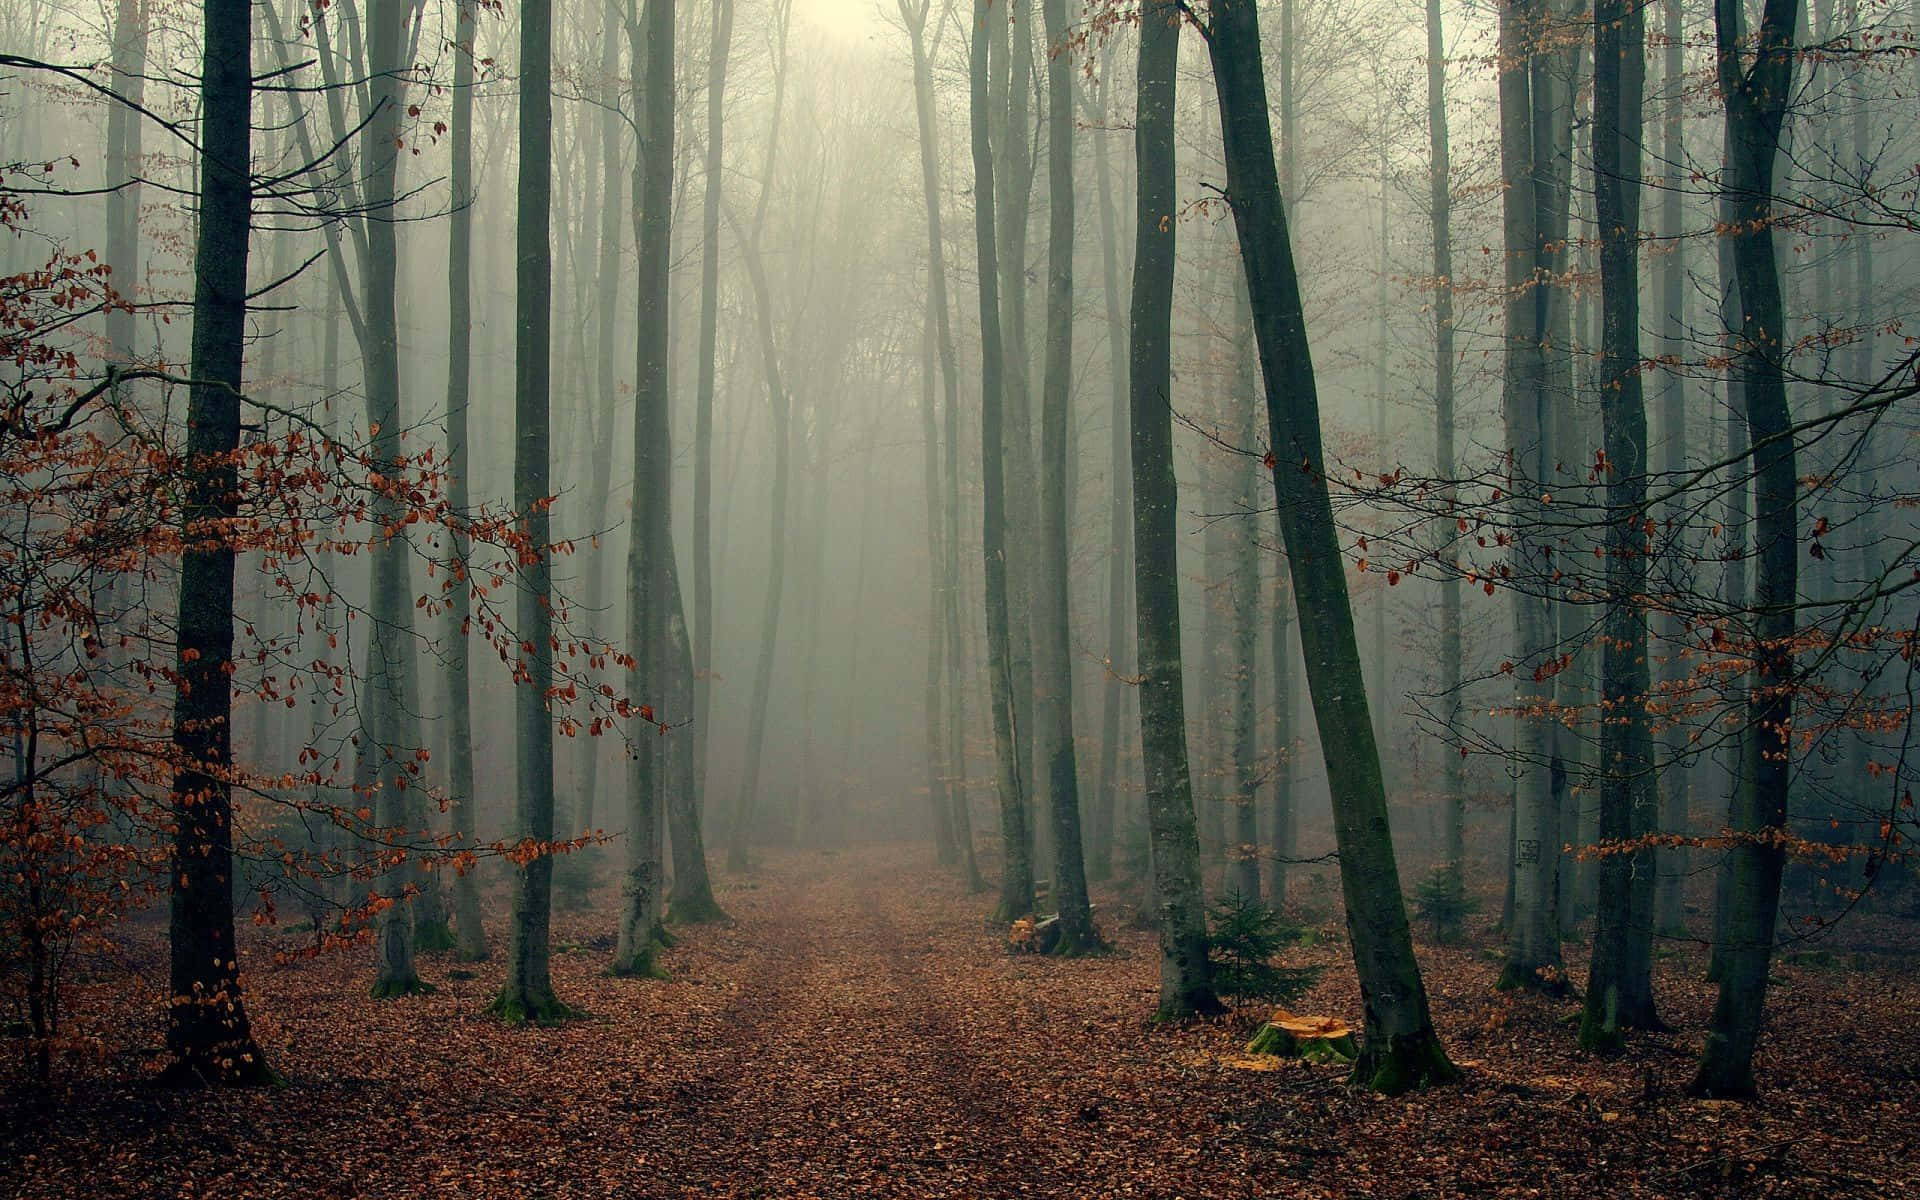 A quiet tree-filled path in a forest.